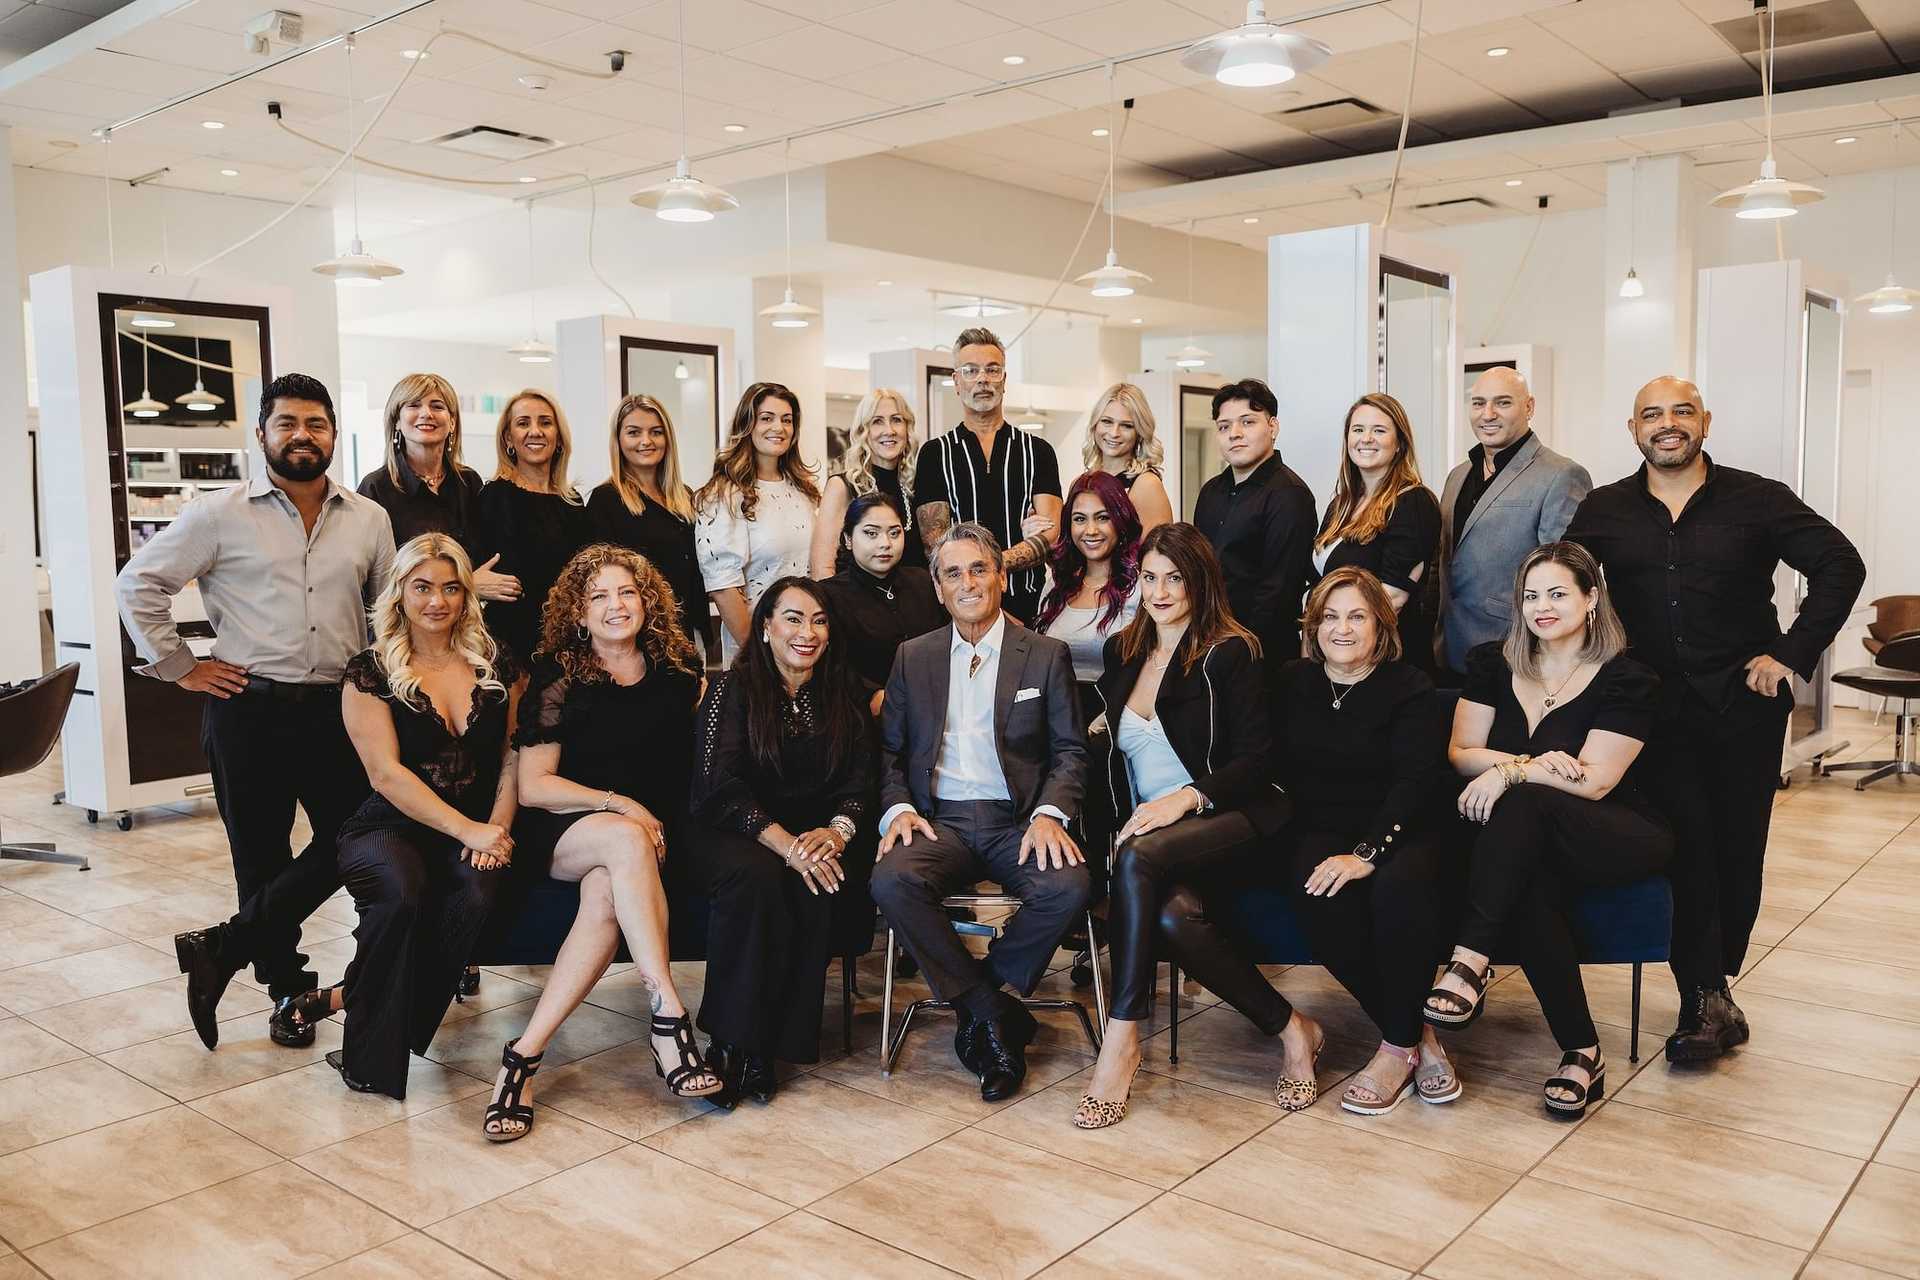 Group of hairstylists posing together in a salon interior.